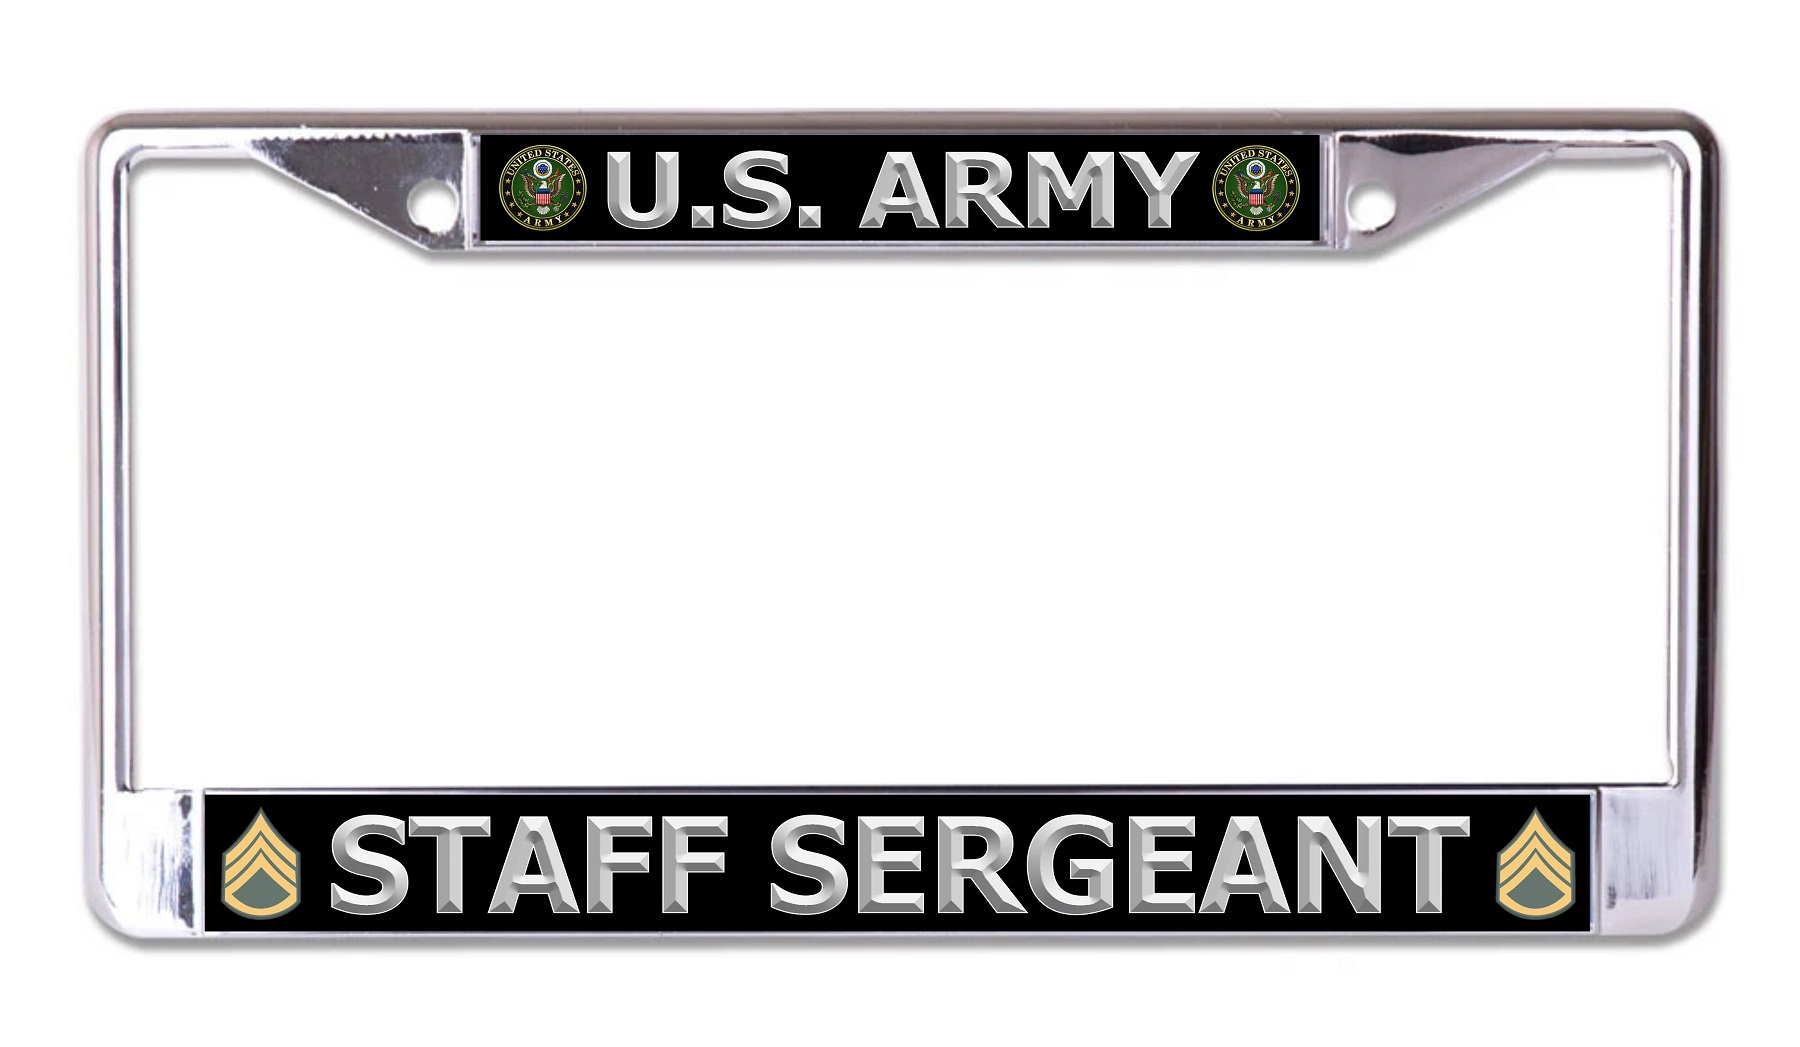 U.S. Army Staff Sergeant Silver Letters Chrome License Plate FRAME